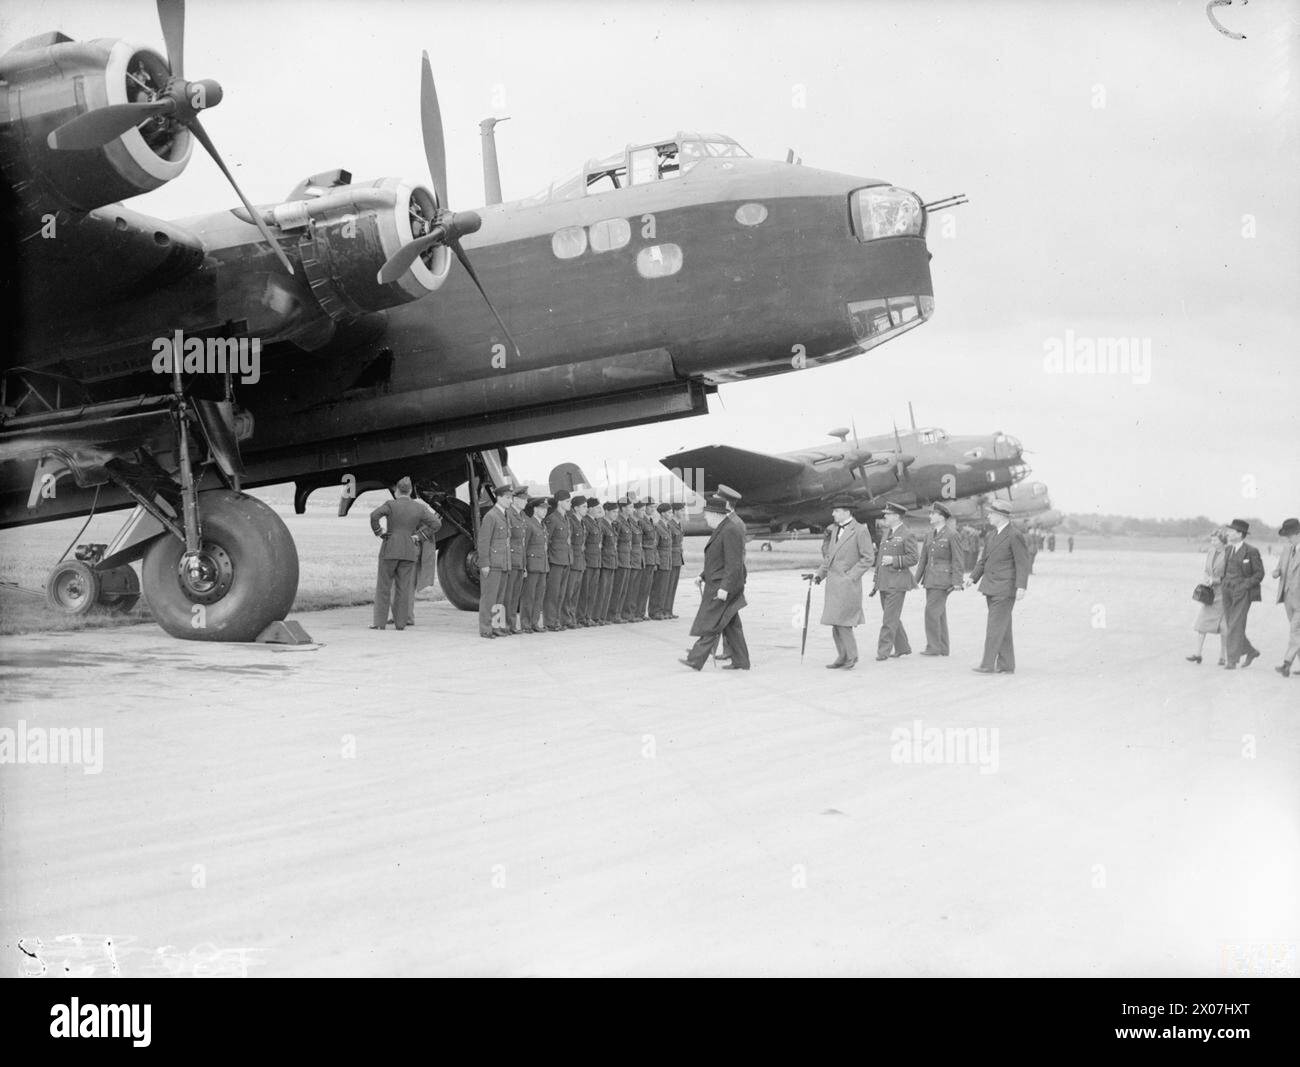 ROYAL AIR FORCE BOMBER COMMAND, 1939-1941. - The Prime Minister, Winston Churchill, and his party approach a Short Stirling Mark I of No. 7 Squadron RAF with its air and ground crew lined up for inspection, during a review of British and American bombers in service with the RAFat Northolt, Middlesex. Accompanying the Prime Minister, but obscured by him, is Air Chief Marshal Sir Charles Portal, Chief of the Air Staff, followed by Sir Archibald Sinclair, Secretary of State for Air and Air Vice-Marshal Trafford Leigh-Mallory, Air Officer Commanding No. 11 Group, Fighter Command. The aircraft line Stock Photo